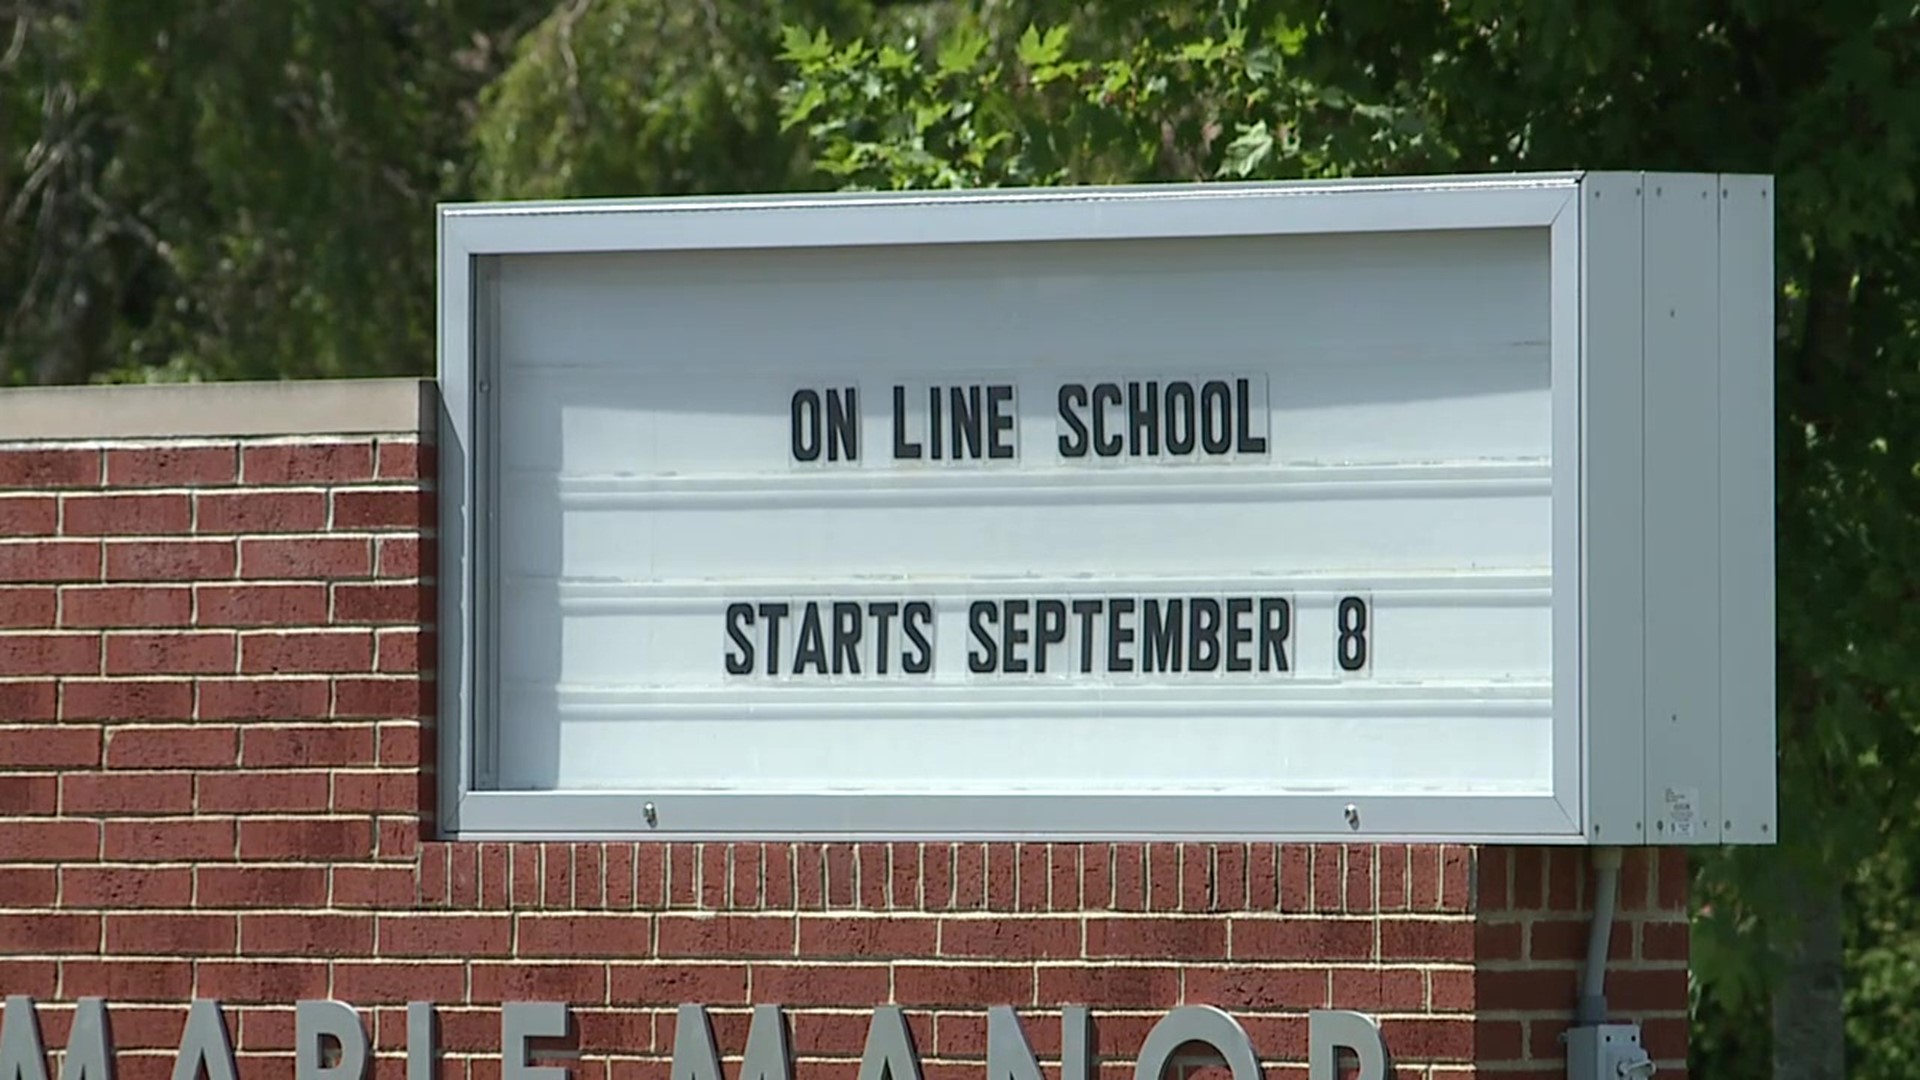 Students in the Hazleton Area School District are less than three weeks away from starting the school year and they will start online.